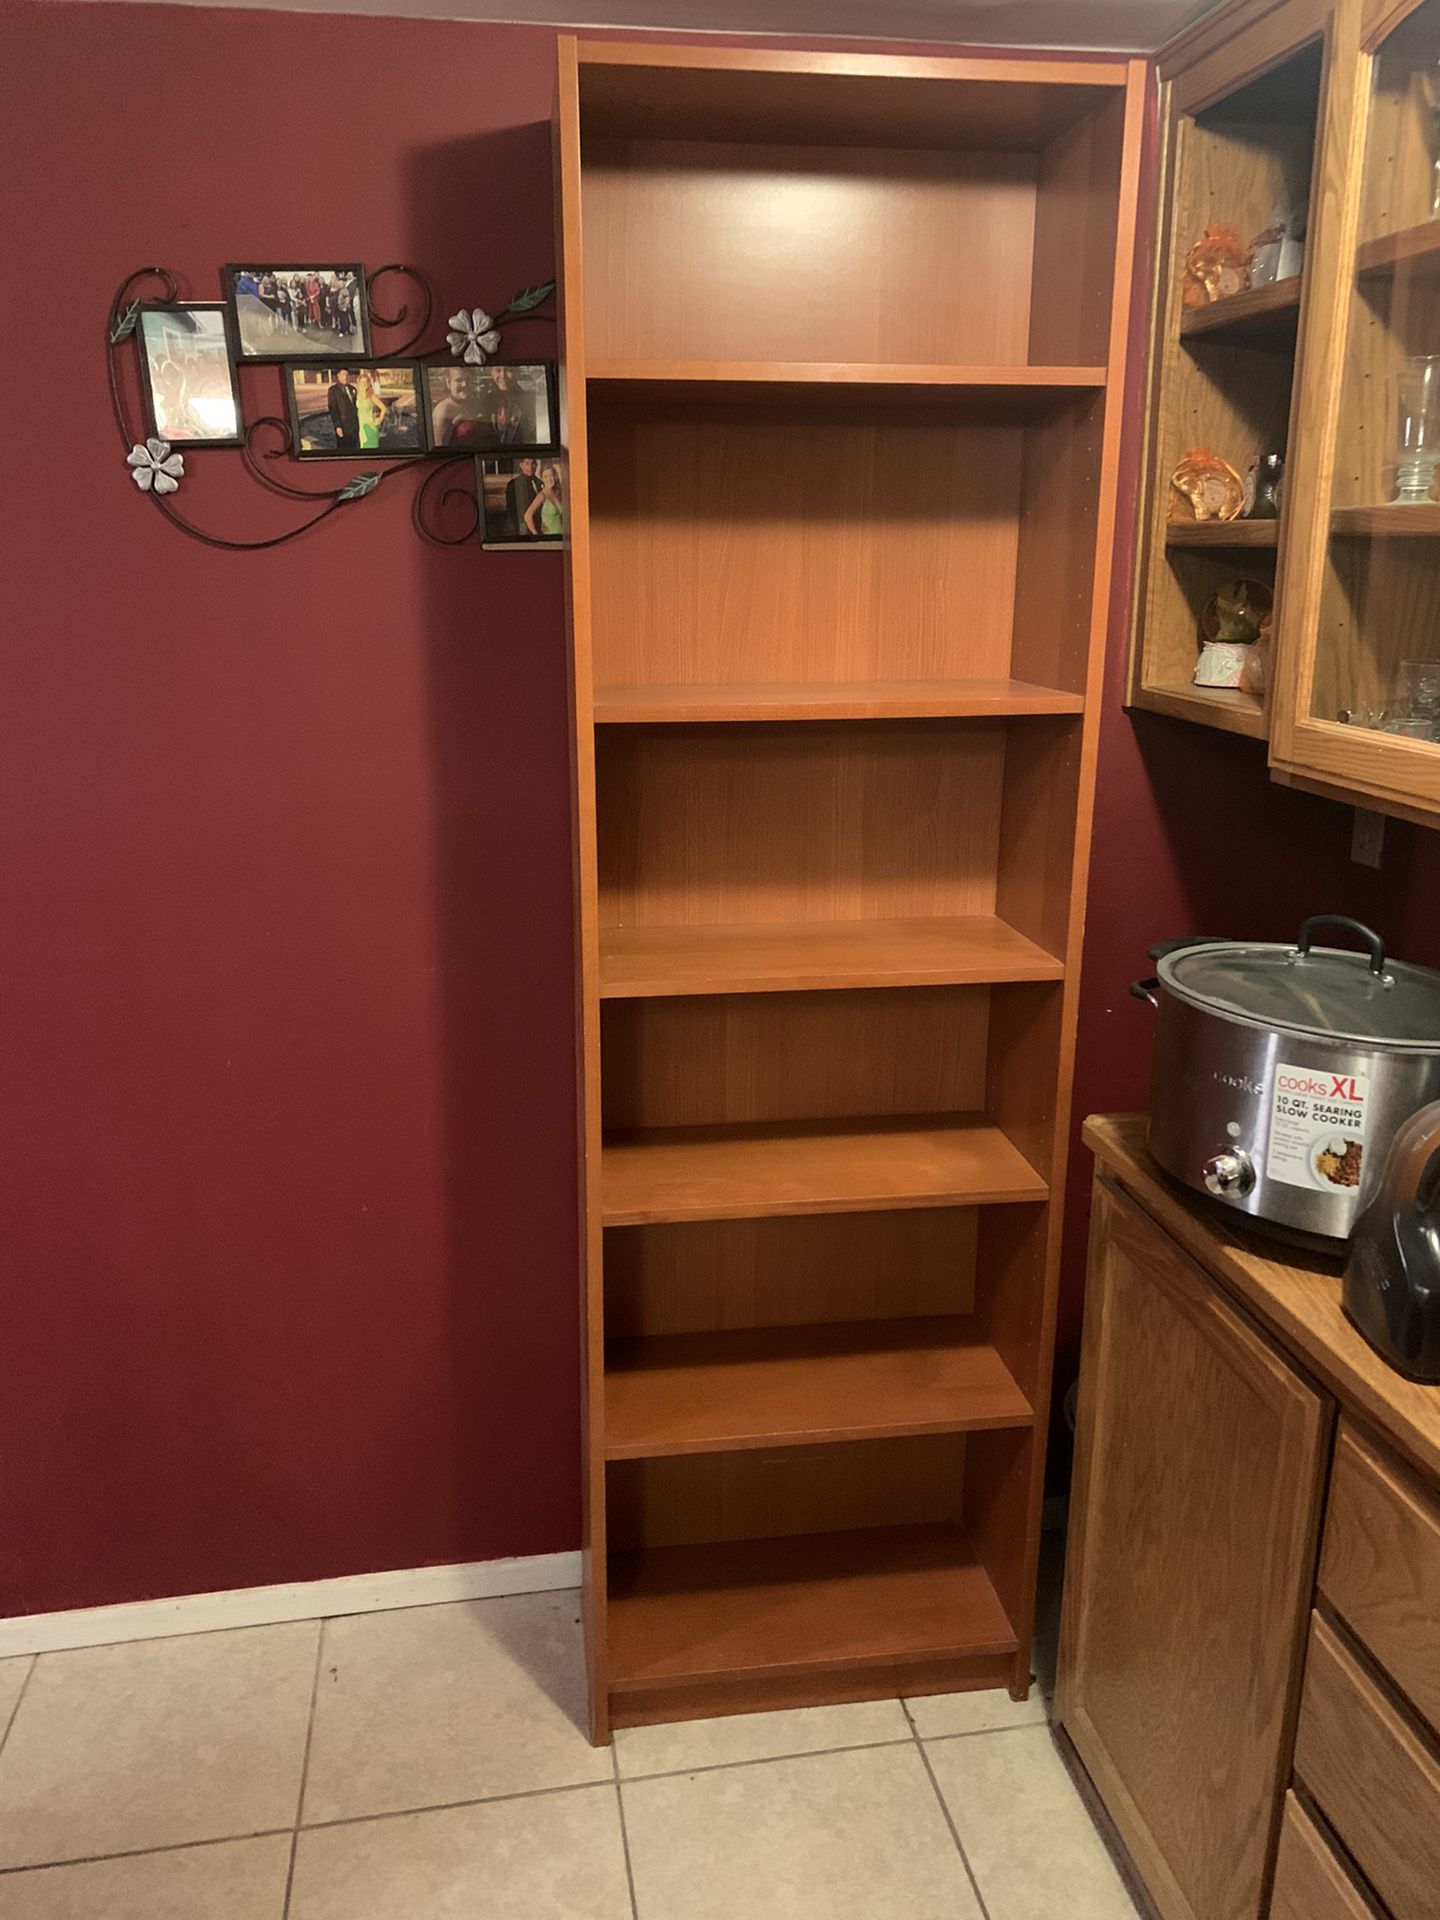 3 matching bookshelves for sale brown color.